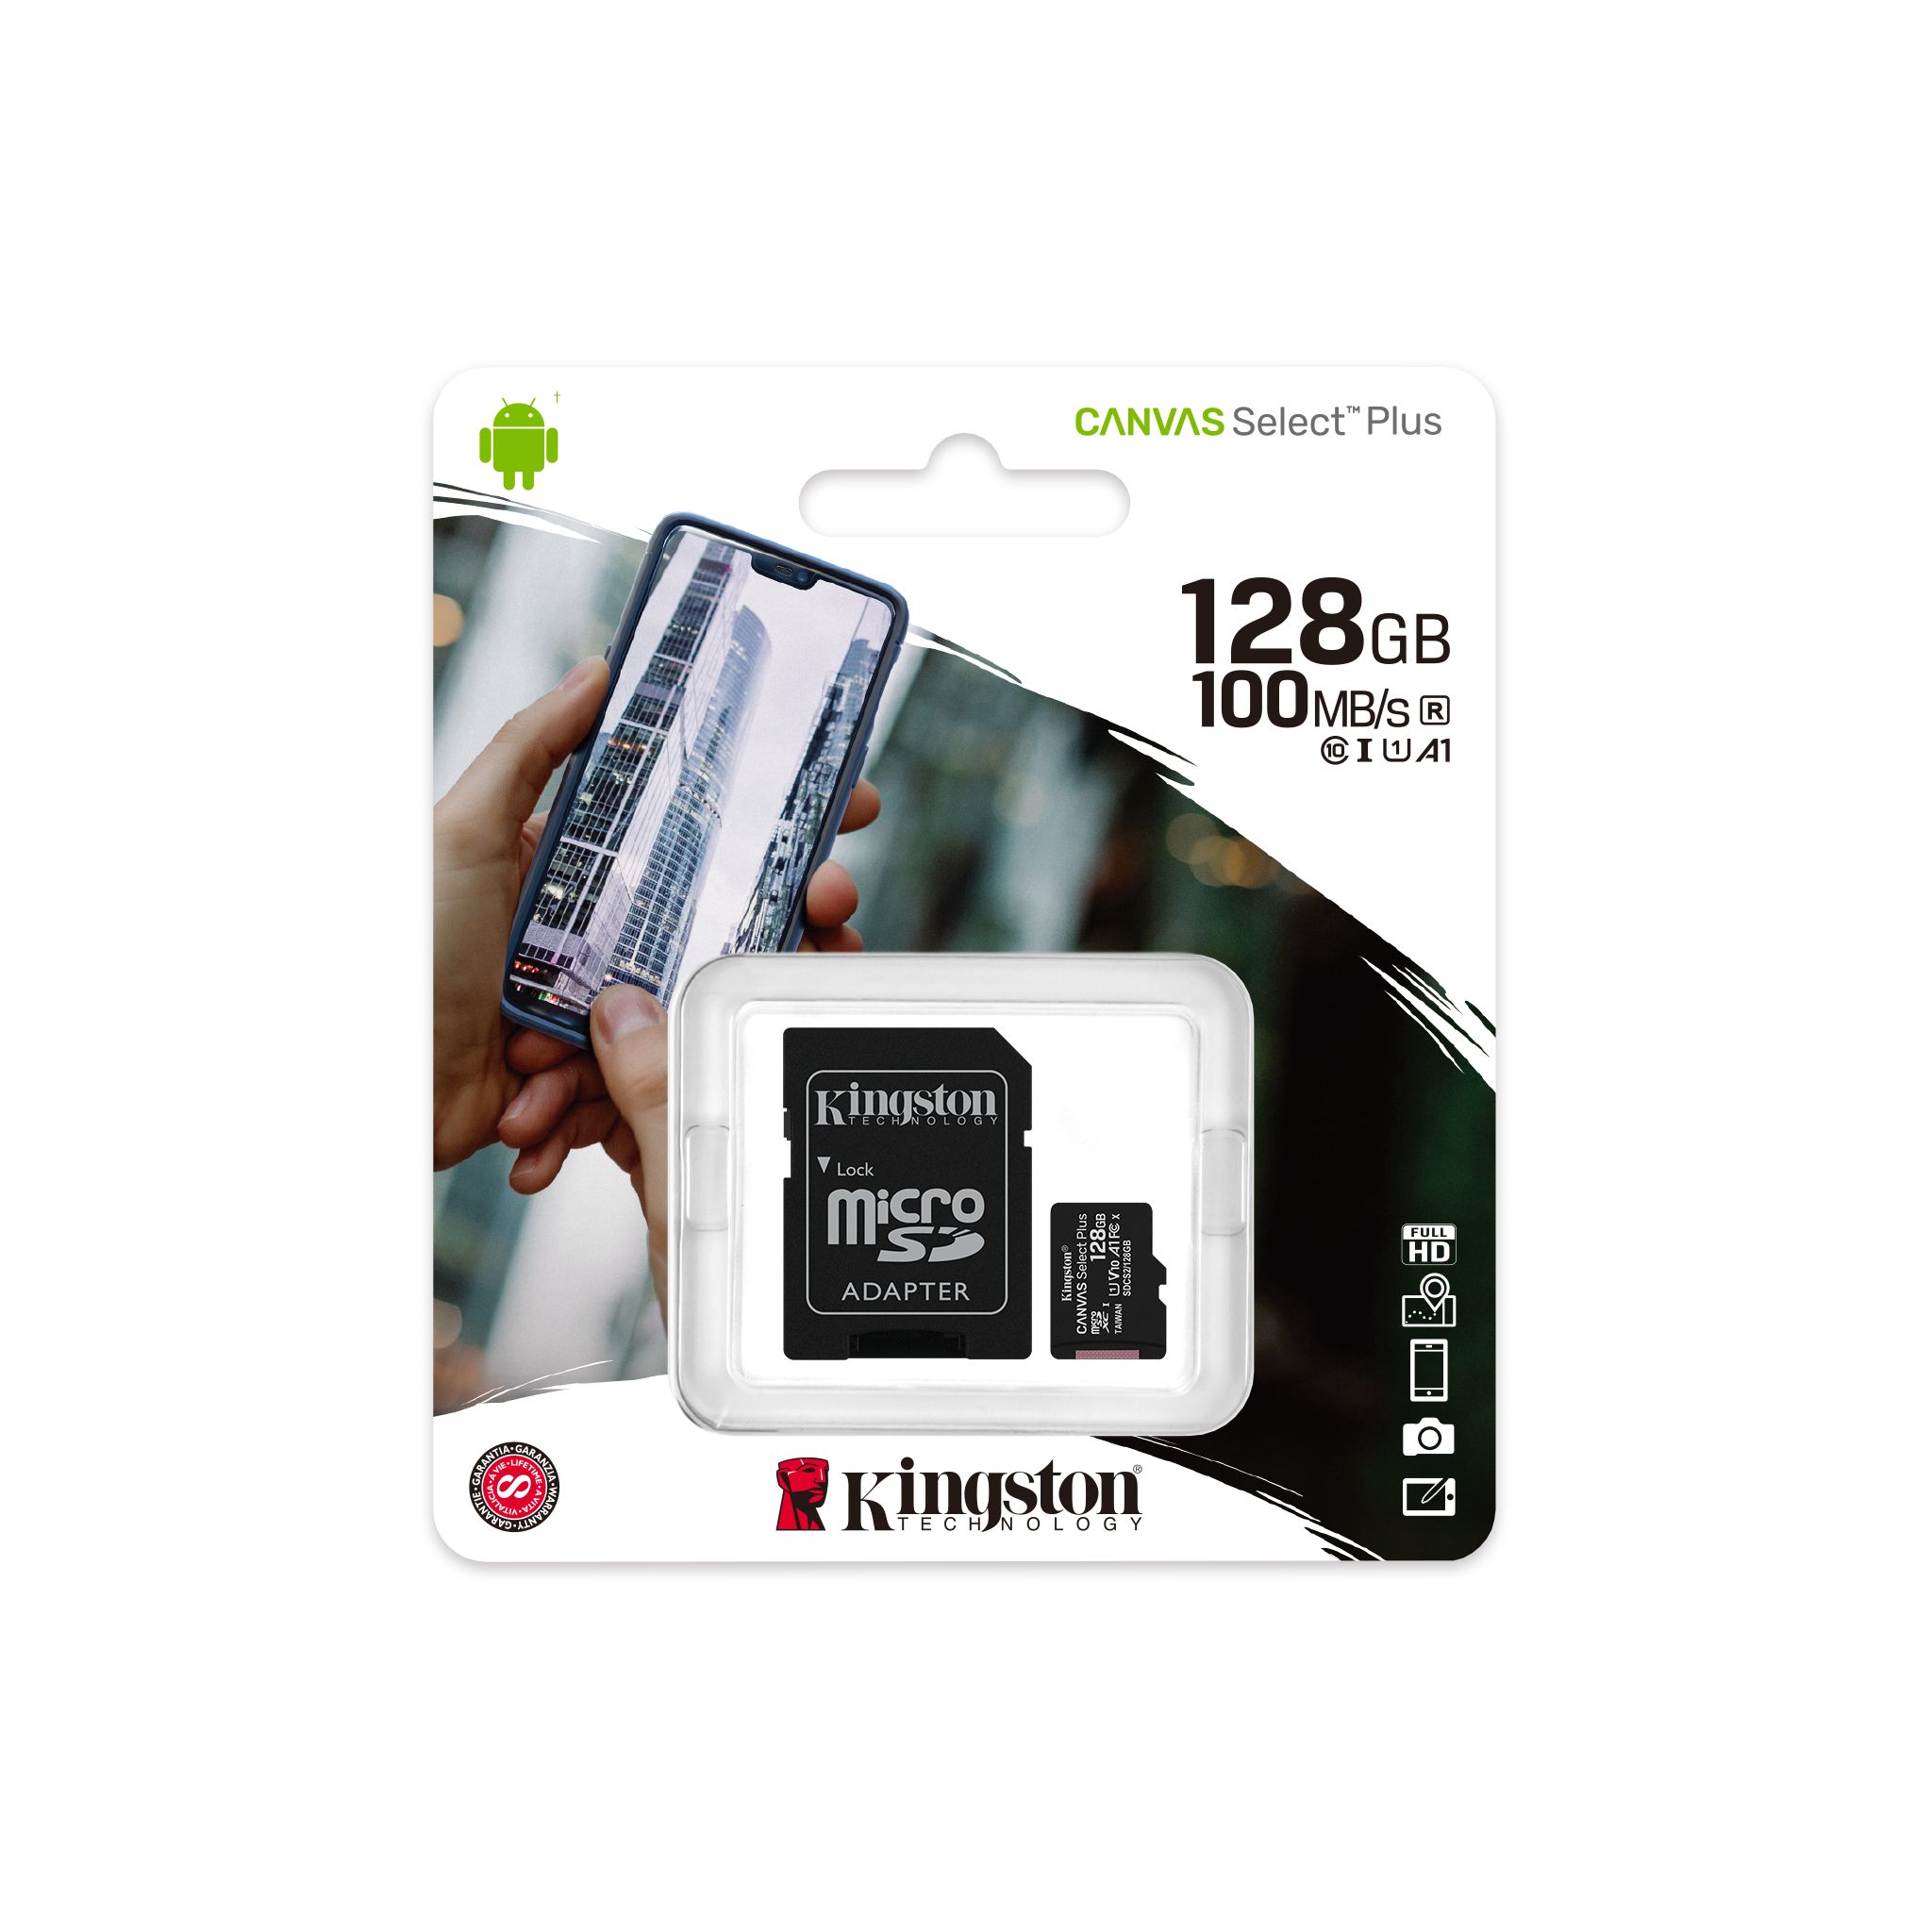 100MBs Works with Kingston Kingston 128GB Oppo X9006 MicroSDXC Canvas Select Plus Card Verified by SanFlash. 